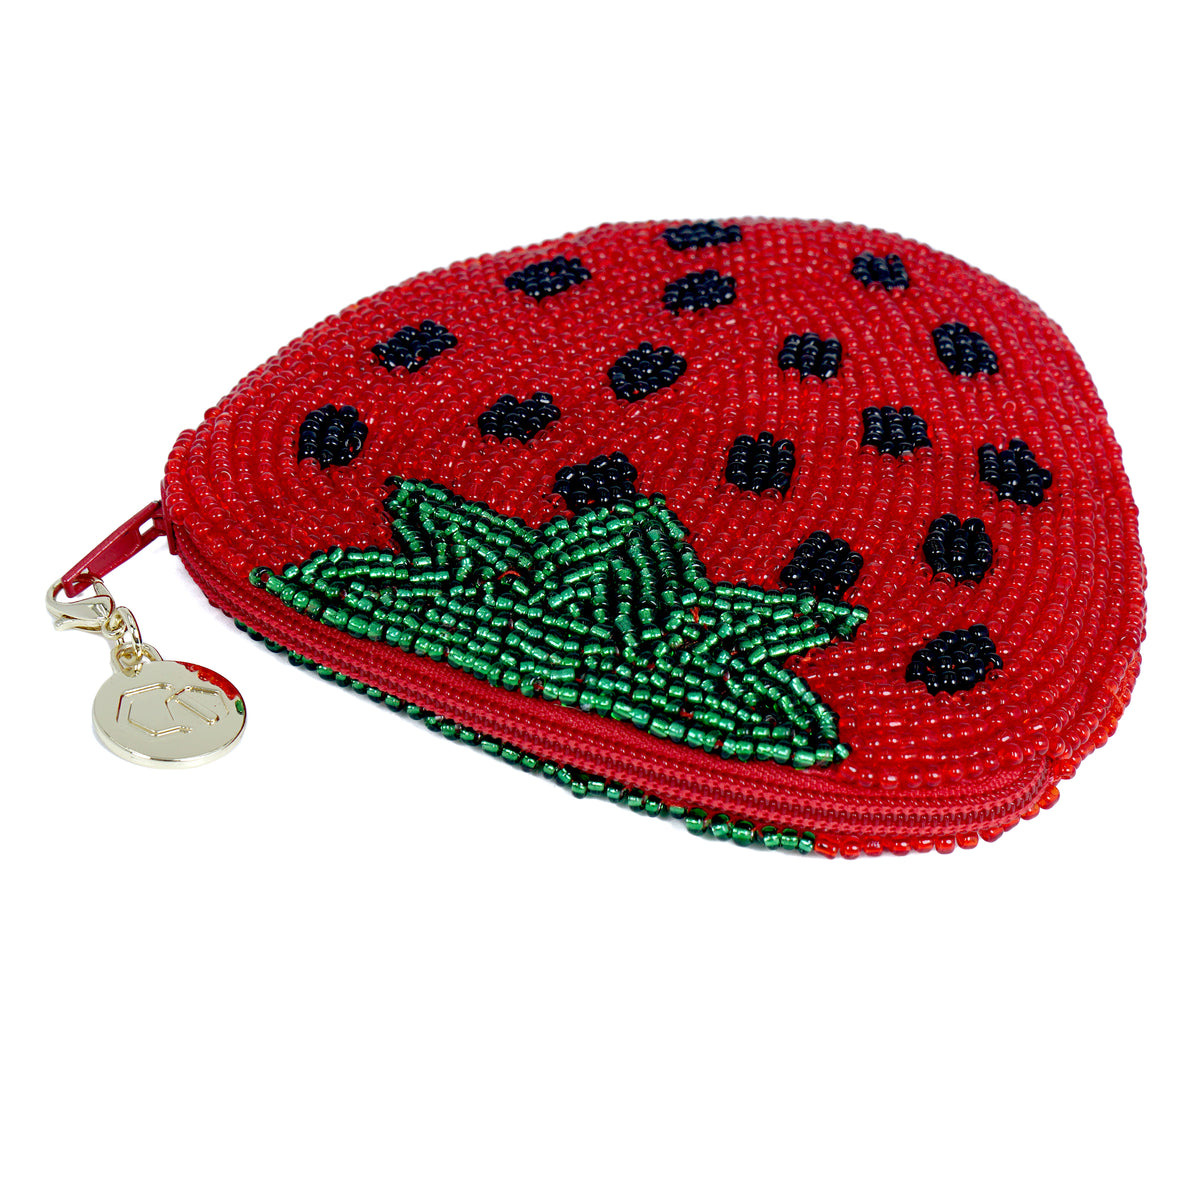 Beaded Coin Purse - Strawberry